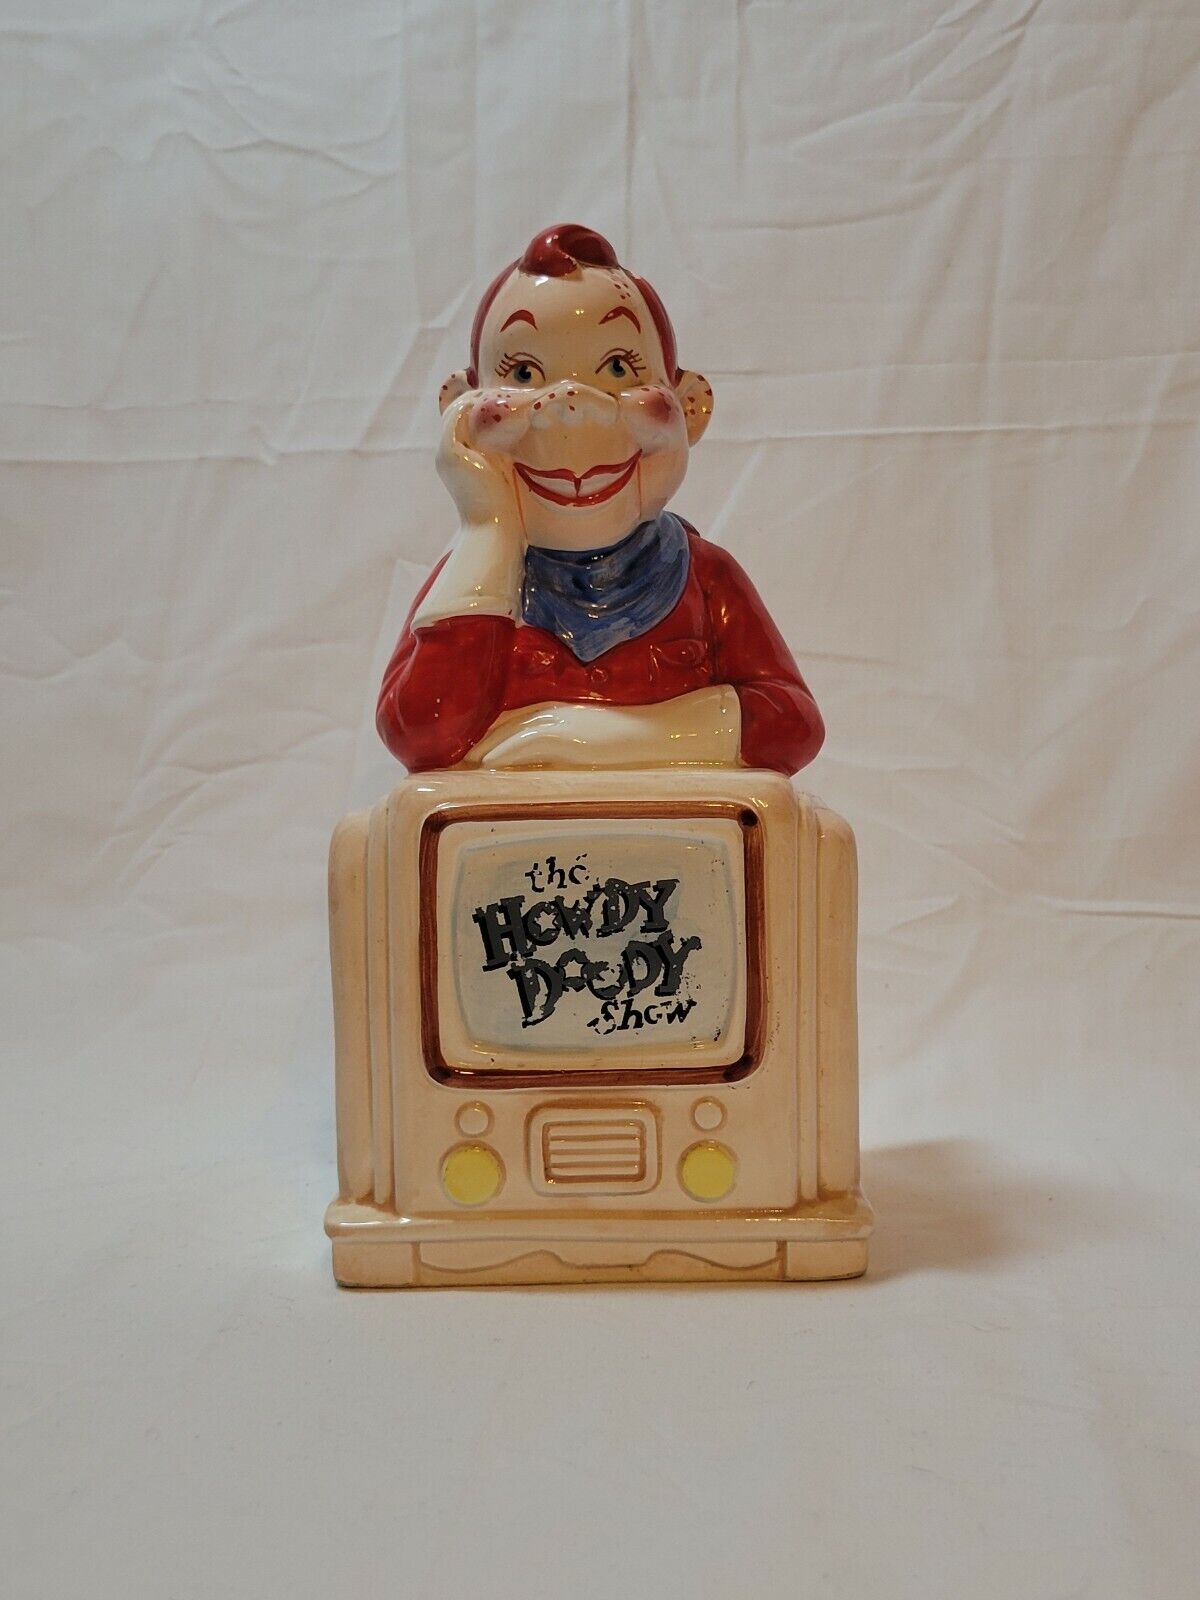 THE HOWDY DOODY SHOW Vandor 1980\'s King Features Character Bank, Used(With Plug)